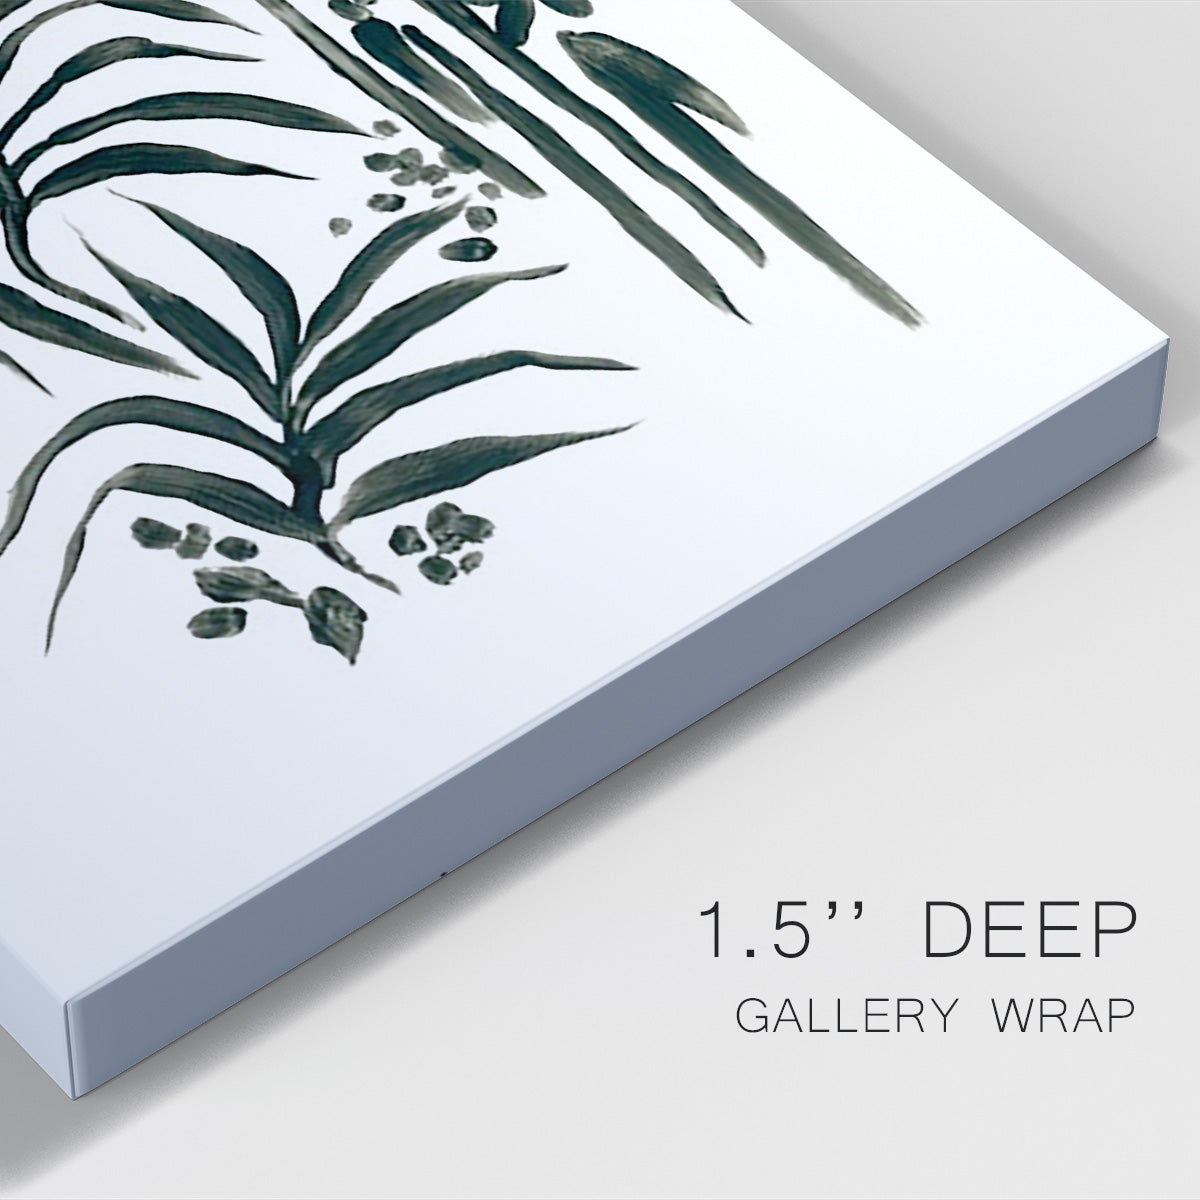 Ink Jungle I Premium Gallery Wrapped Canvas - Ready to Hang